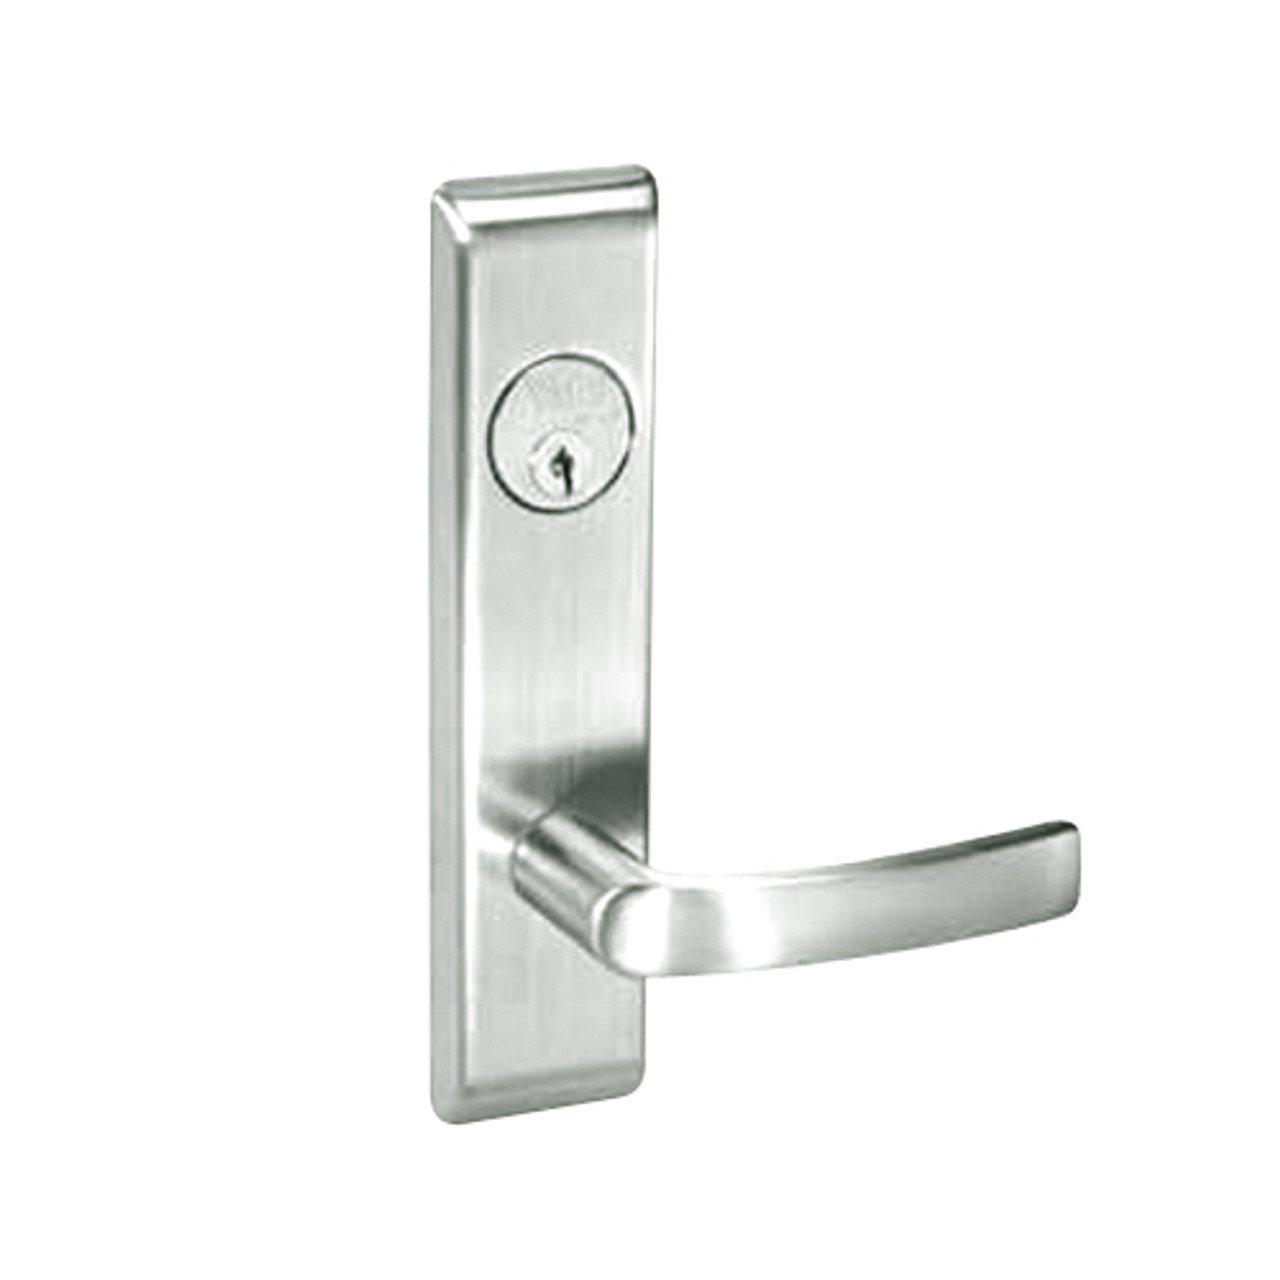 MOCN8830-2FL-618 Yale 8800FL Series Double Cylinder Mortise Asylum Locks with Monroe Lever in Bright Nickel